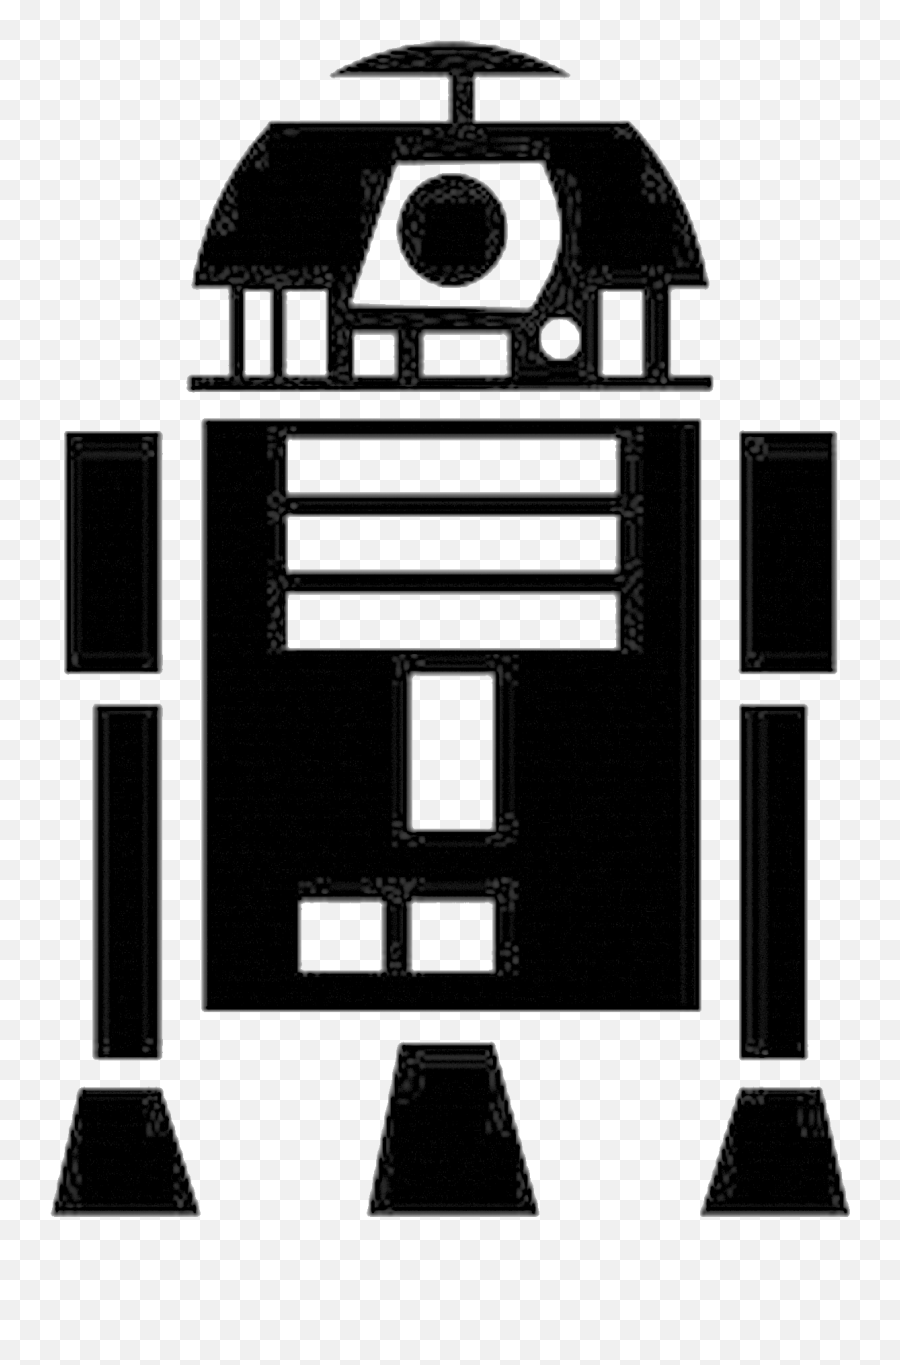 Silhouette Star Wars Clipart Black And - Star Wars R2 D2 Silhouette Emoji,Star Wars Emoji Iphone